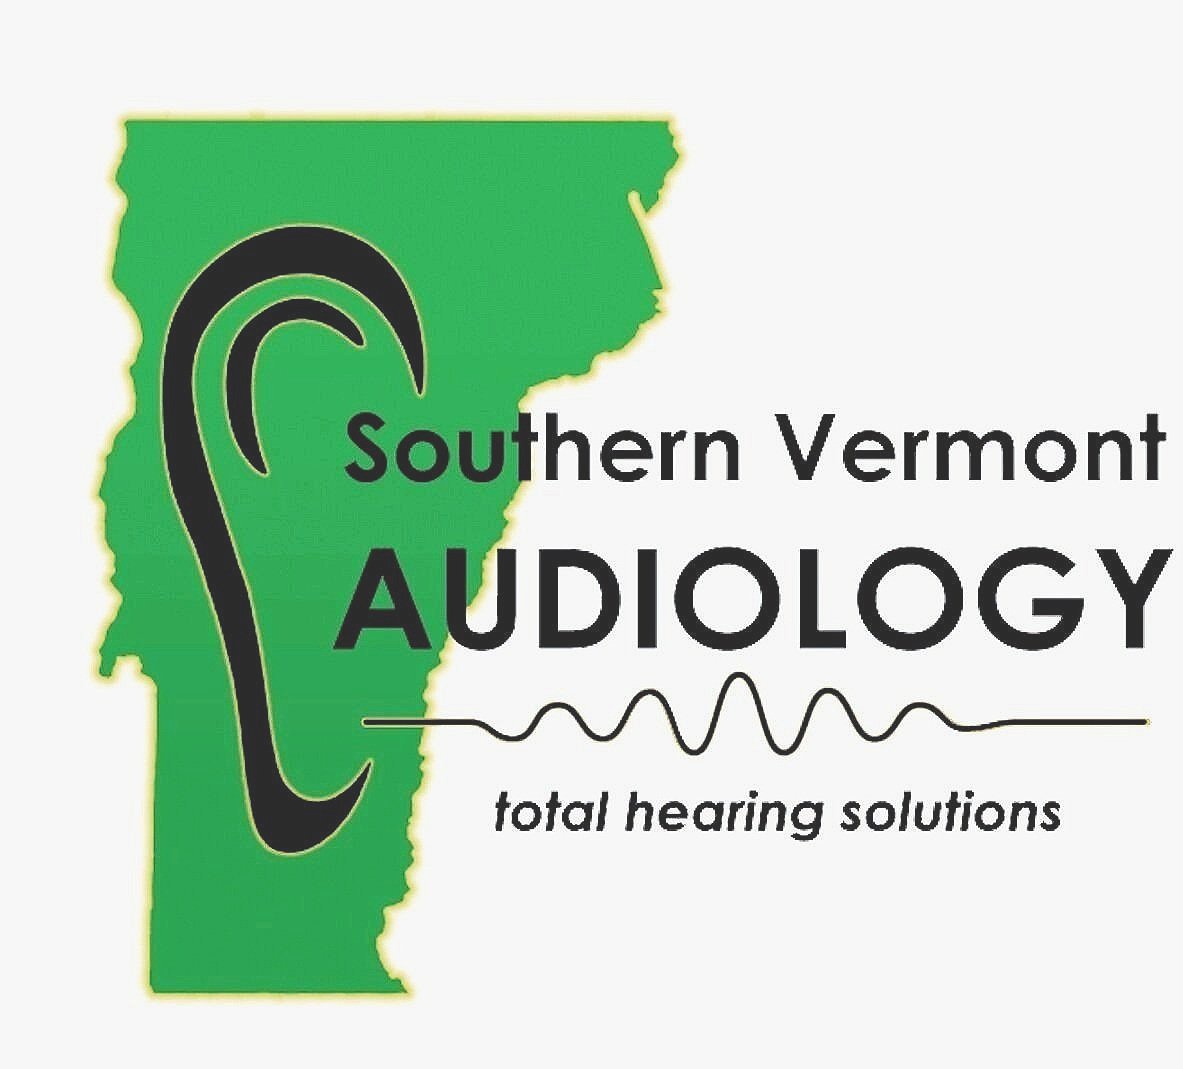 Southern Vermont Audiology